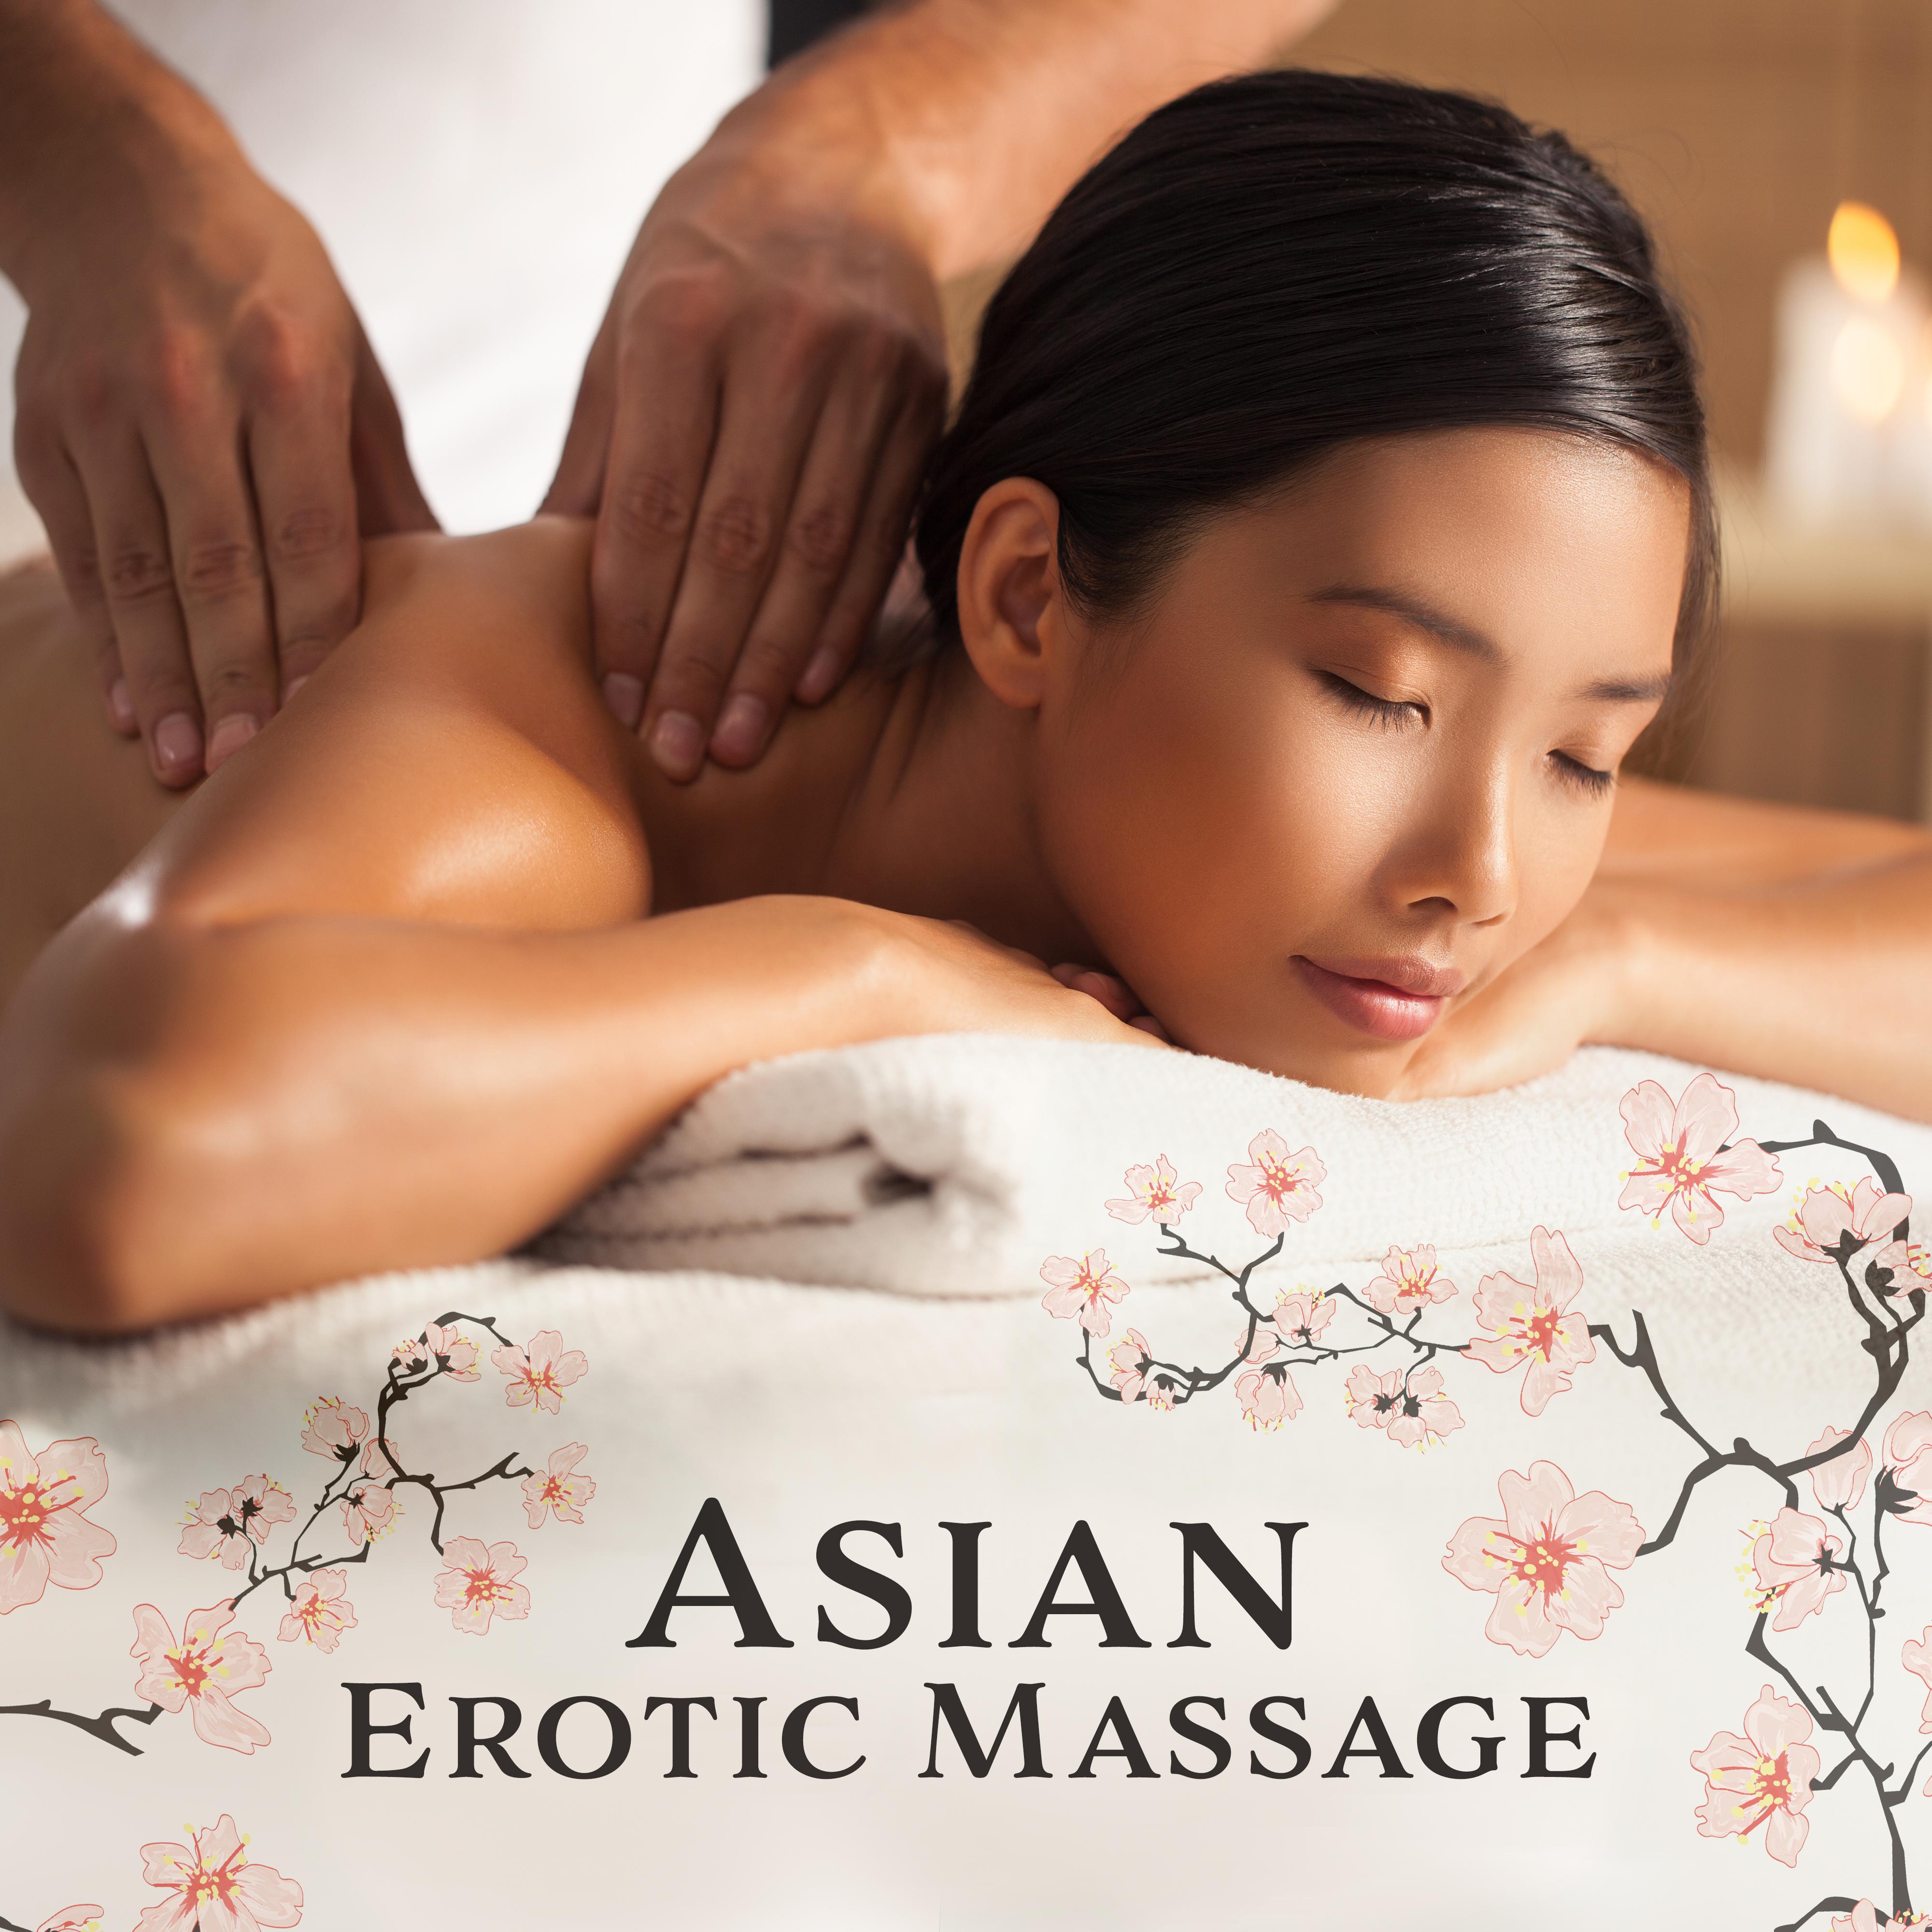 Asian Erotic Massage  Tantric Music for Relaxation, Zen Lounge, Inner Harmony, Calming Sounds to Rest, Spa  Wellness, Massage Music, Lounge